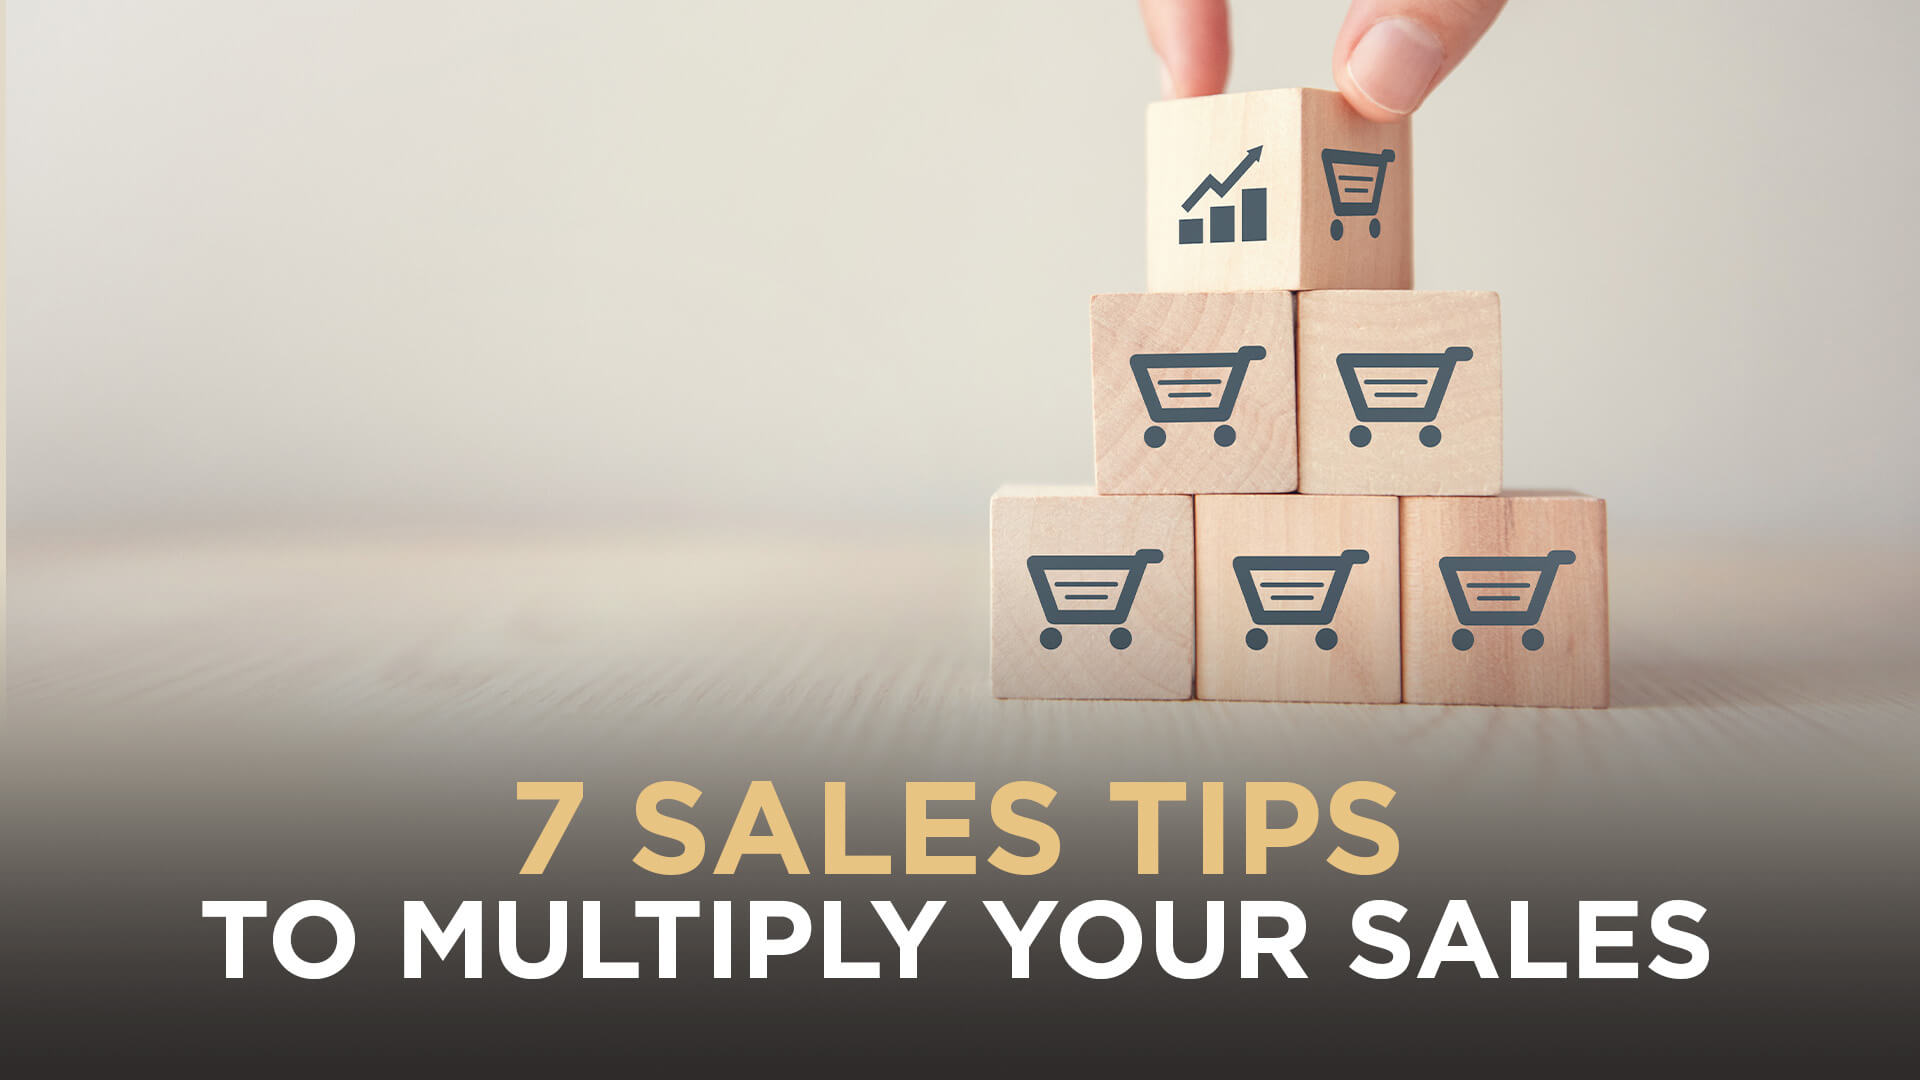 7 Sales Tips to Multiply Your Sales